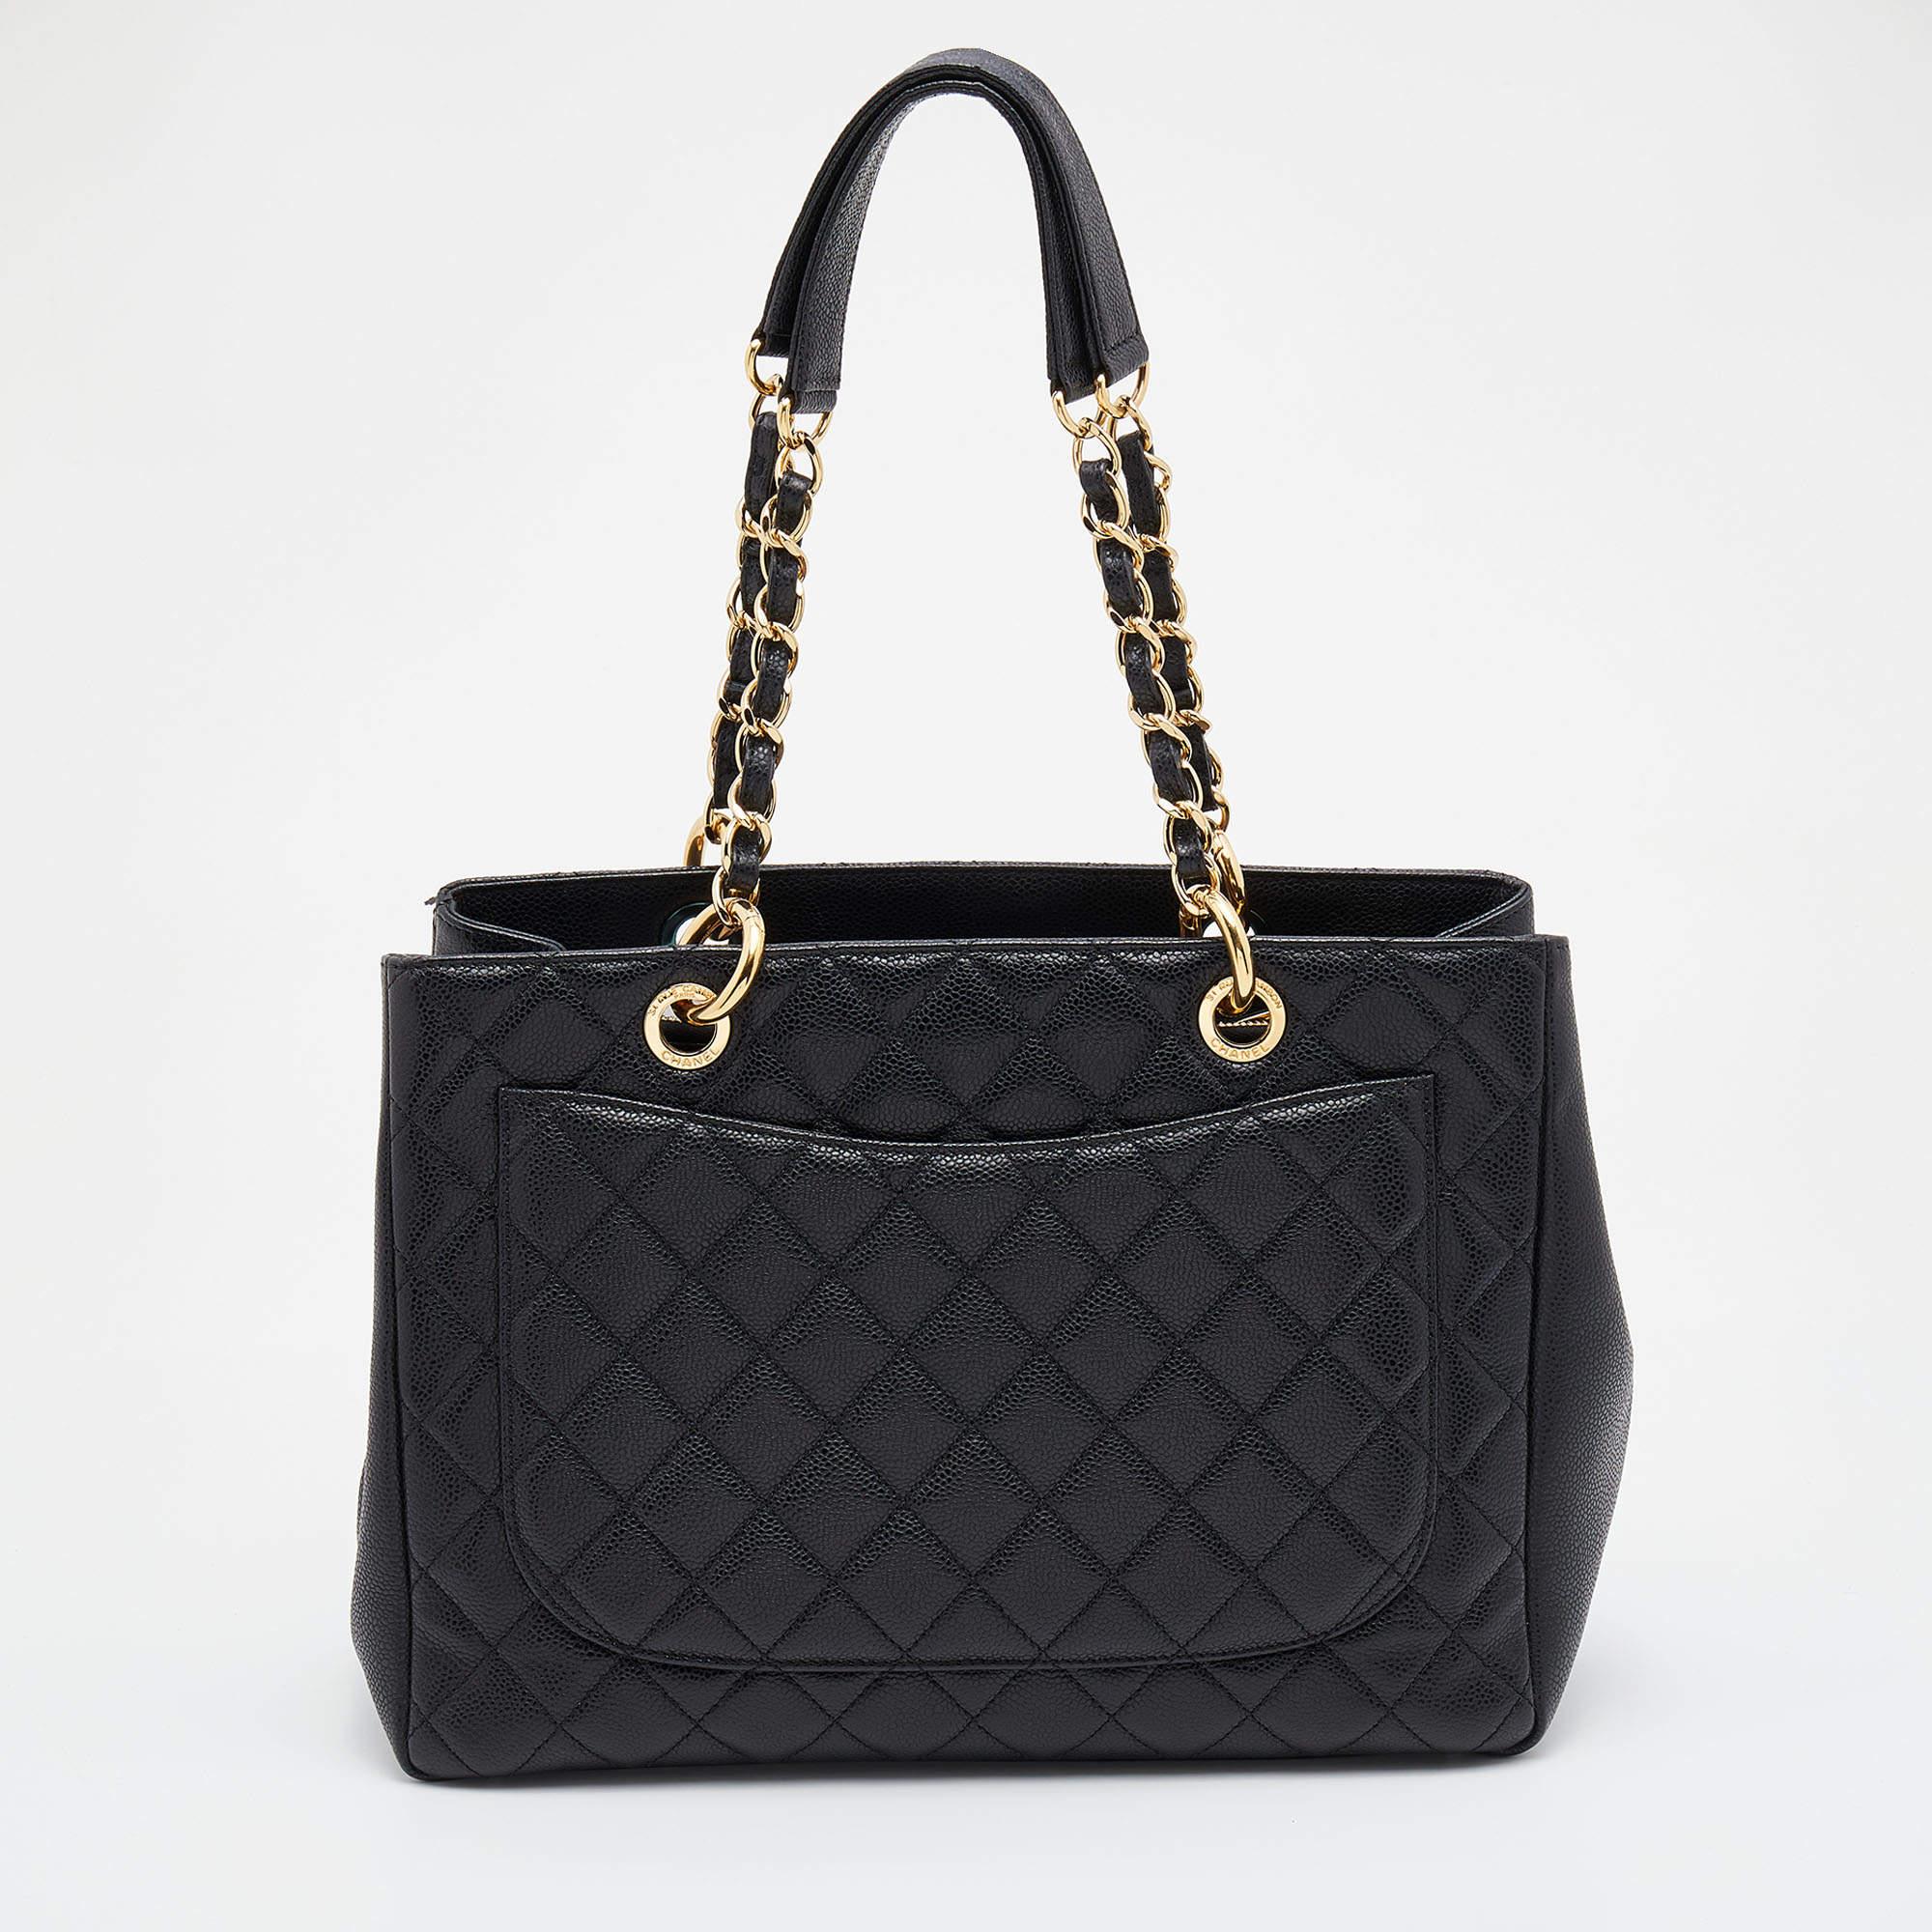 Chanel Black Quilted Caviar Leather GST Shopper Tote 3